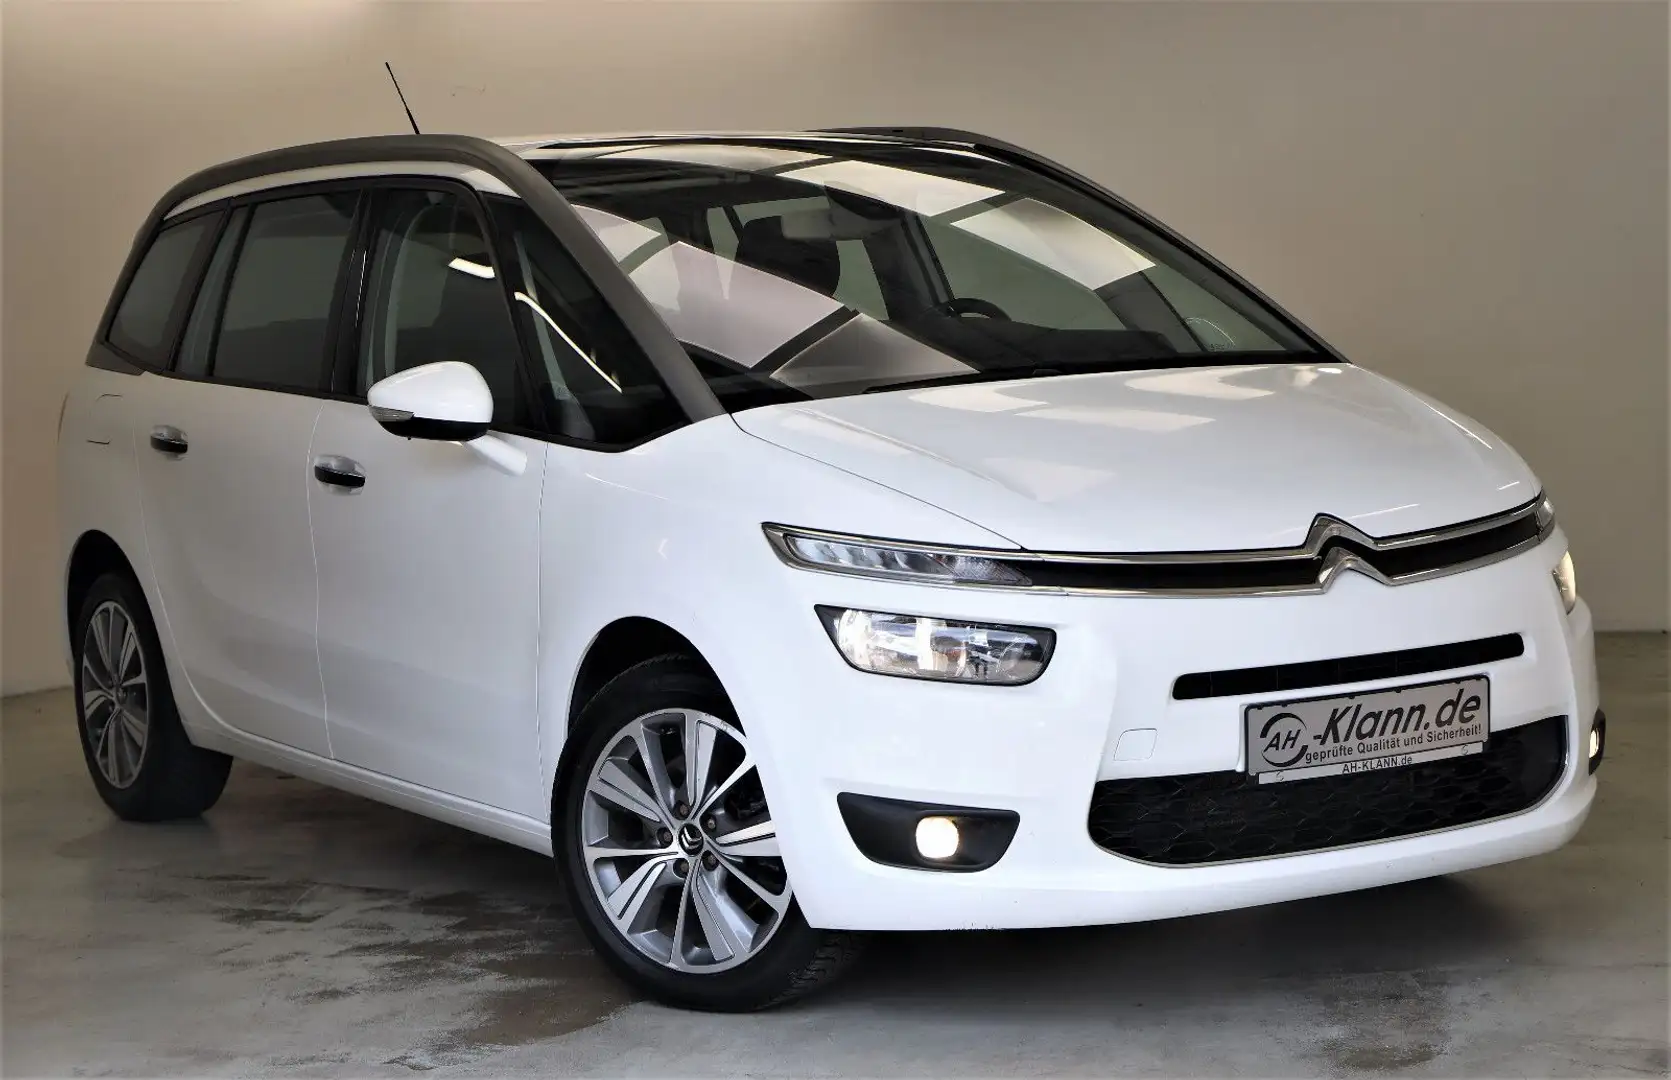 Citroen Grand C4 Picasso C4 2.0 HDi 150PS Grand Picasso/Spacetourer LED Beyaz - 1